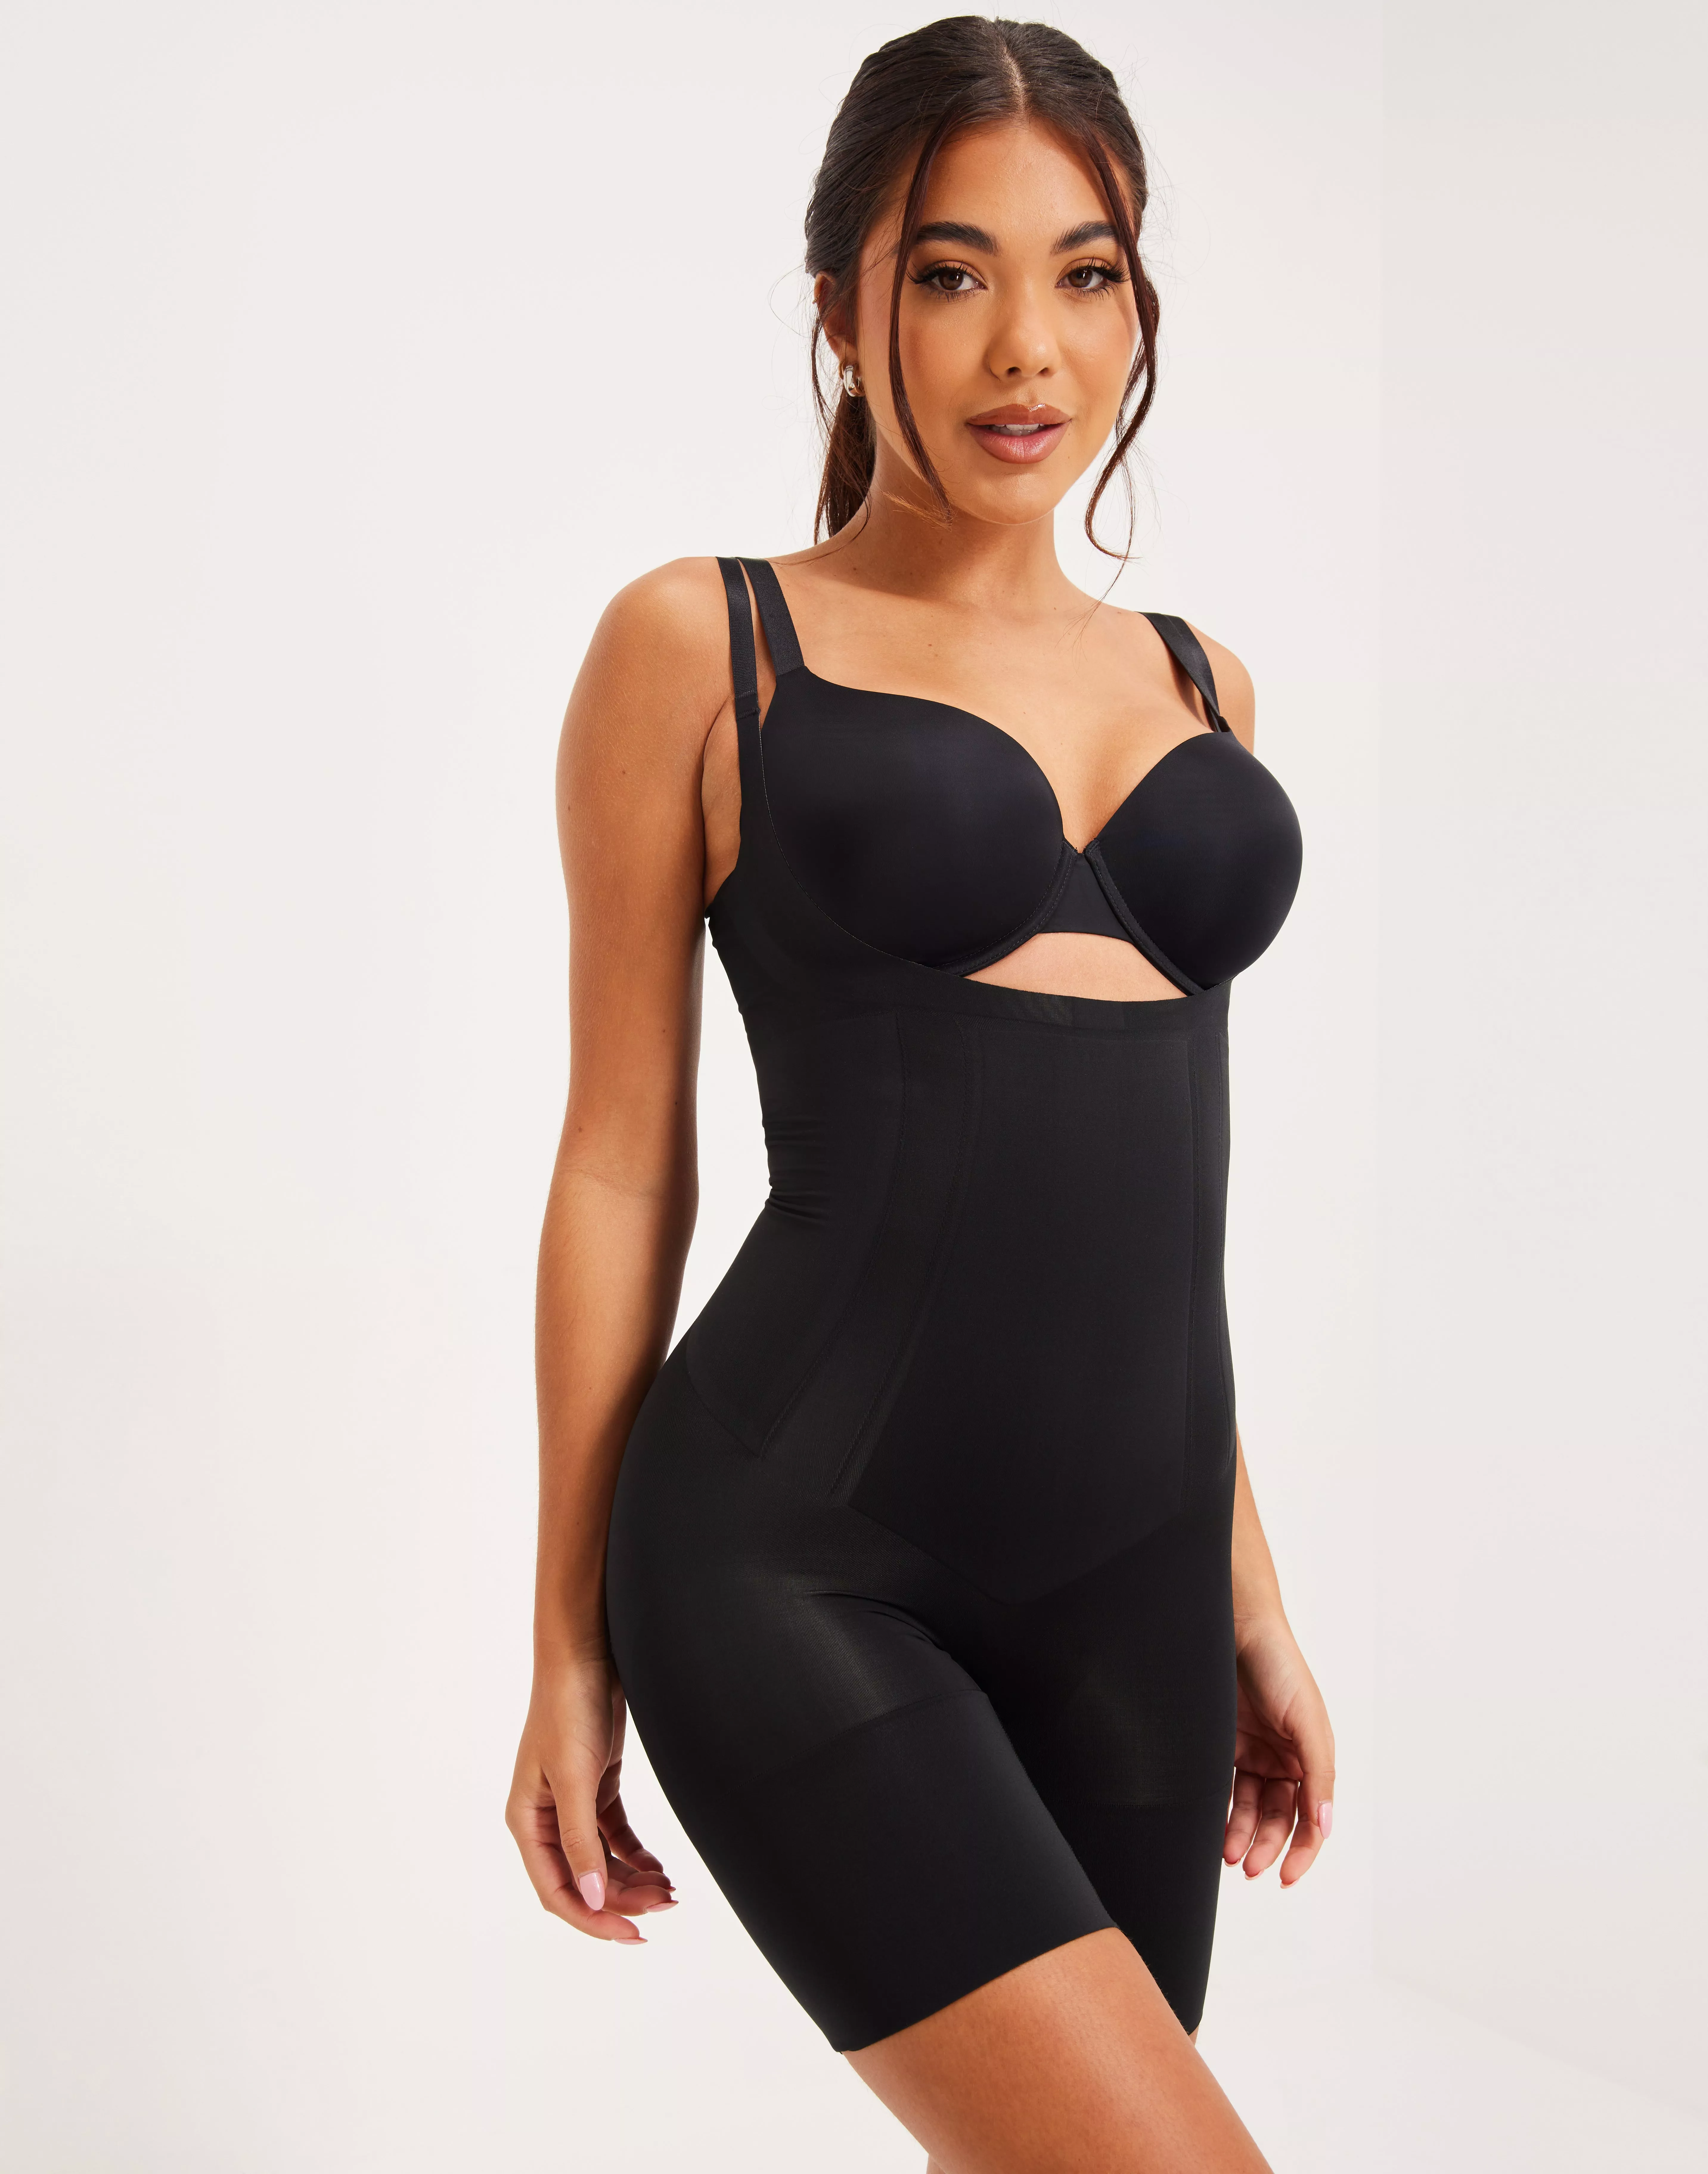 SPANX Tops for Women - Shop Now at Farfetch Canada